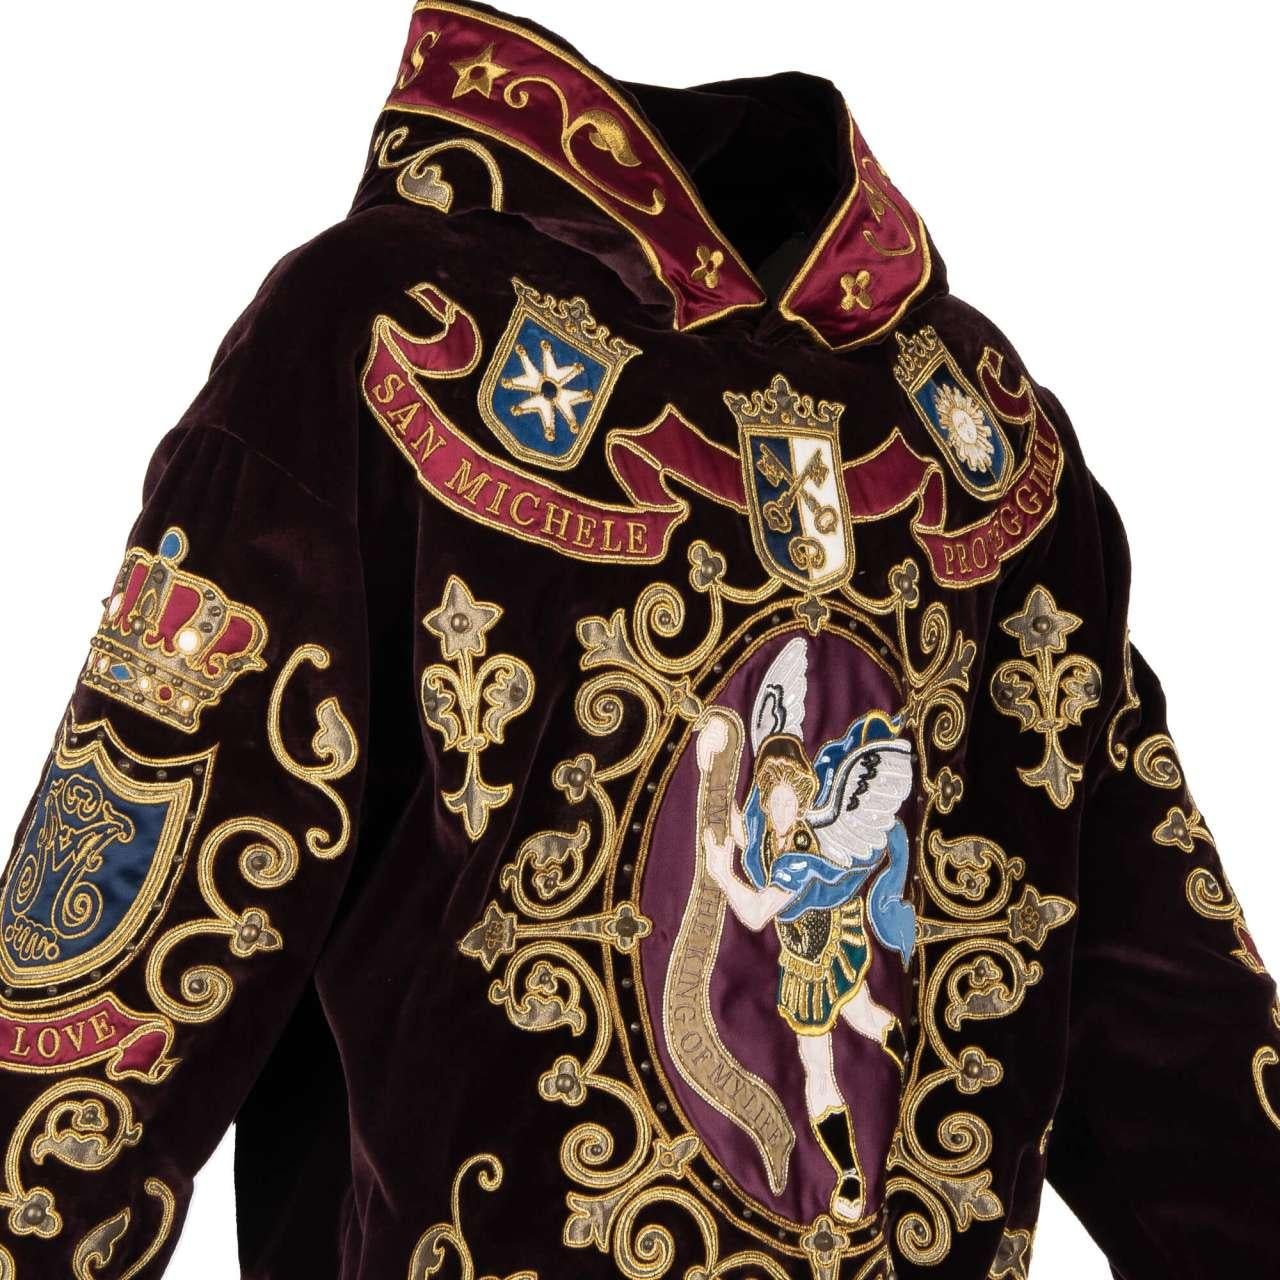 D&G Velvet Hoody Sweater with San Michele Crown King Embroidery Bordeaux Gold 52 For Sale 2